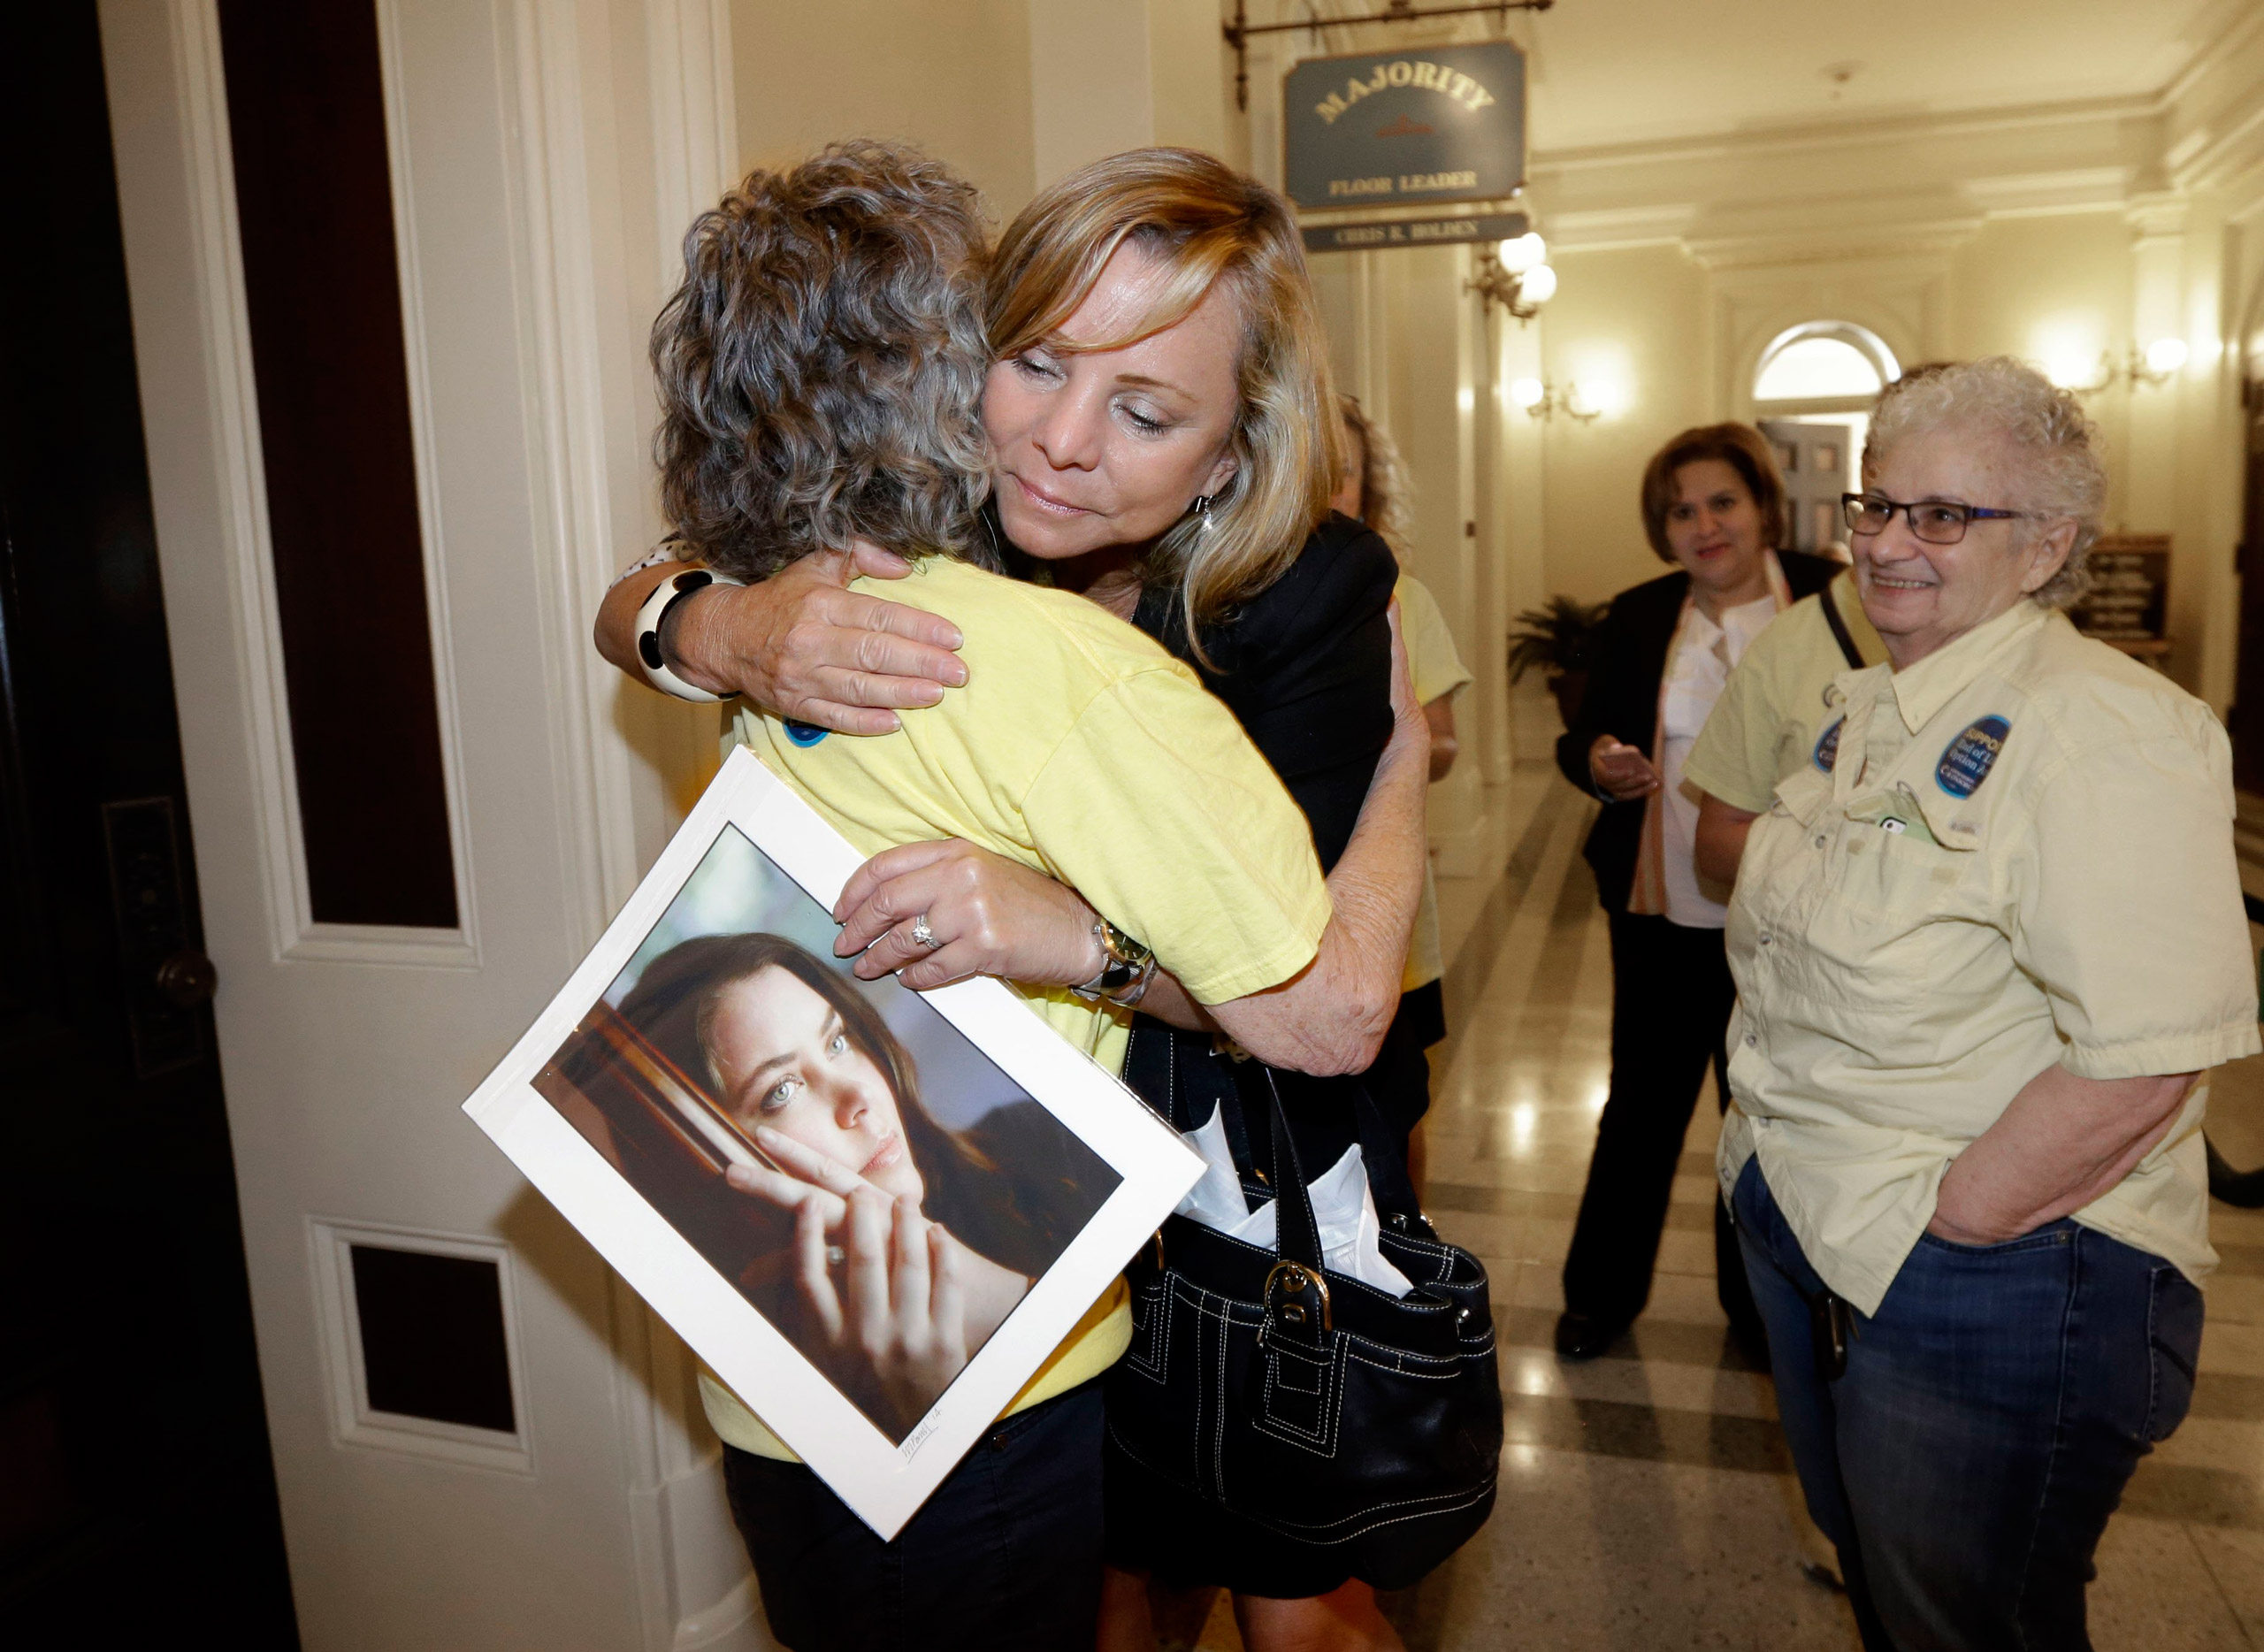 Debbie Ziegler holds a photo of her daughter, Brittany Maynard, as she receives congratulations from Ellen Pontac, after a right-to die measure was approved by the state Assembly, in Sacramento, Calif., on Sept. 9, 2015. (Rich Pedroncelli—AP)